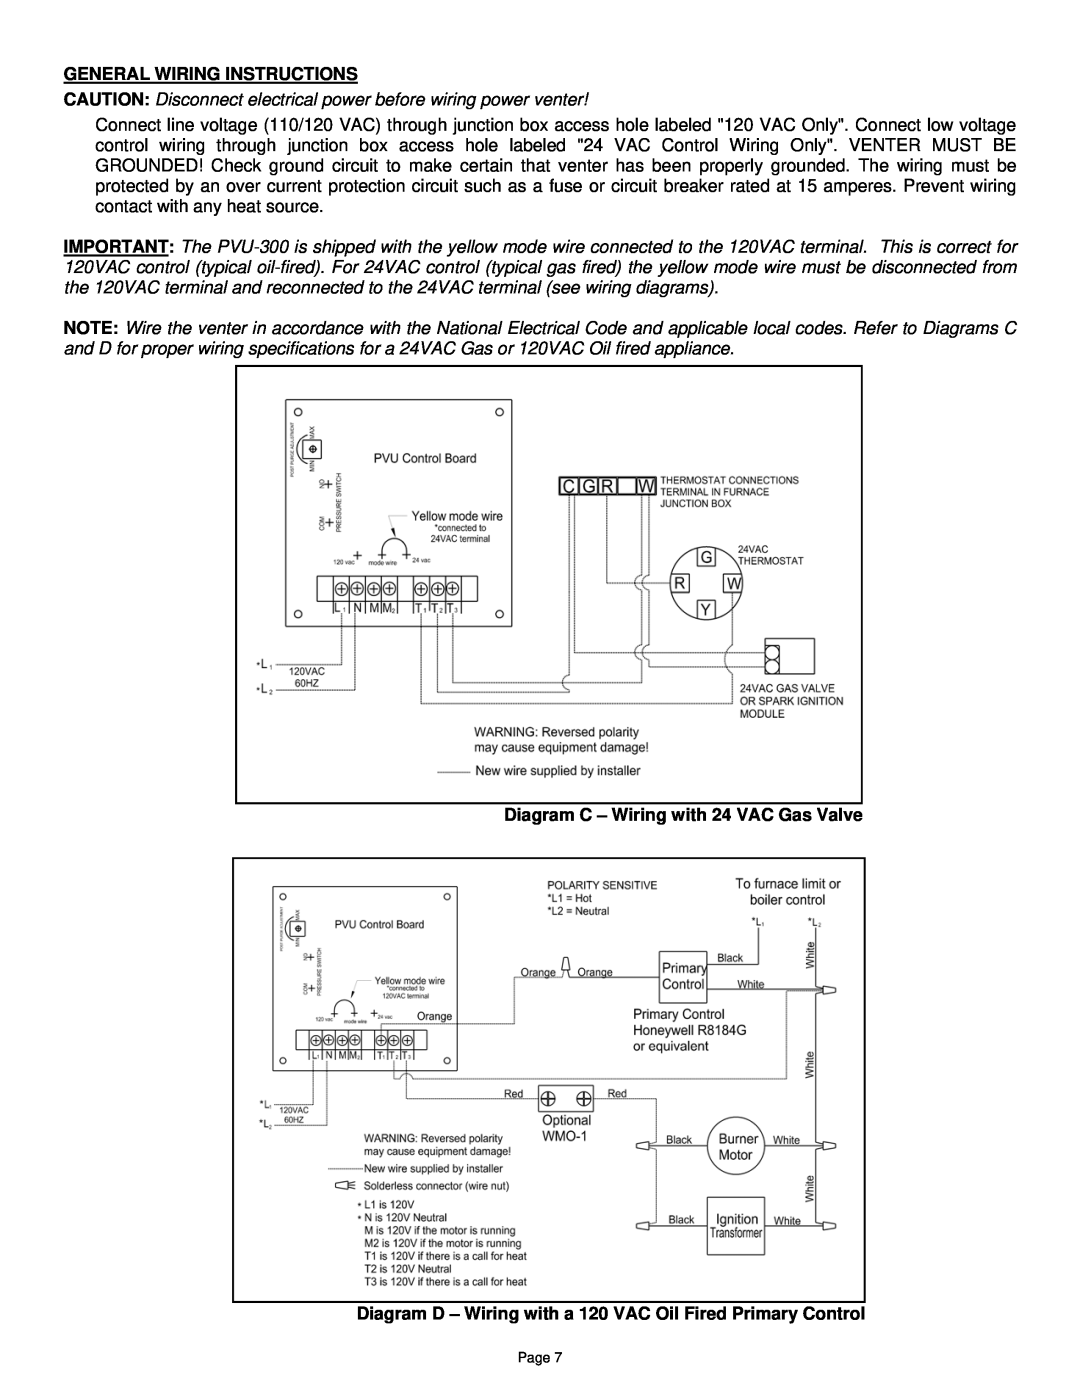 Field Controls PVU-300 installation instructions General Wiring Instructions, Diagram C - Wiring with 24 VAC Gas Valve 